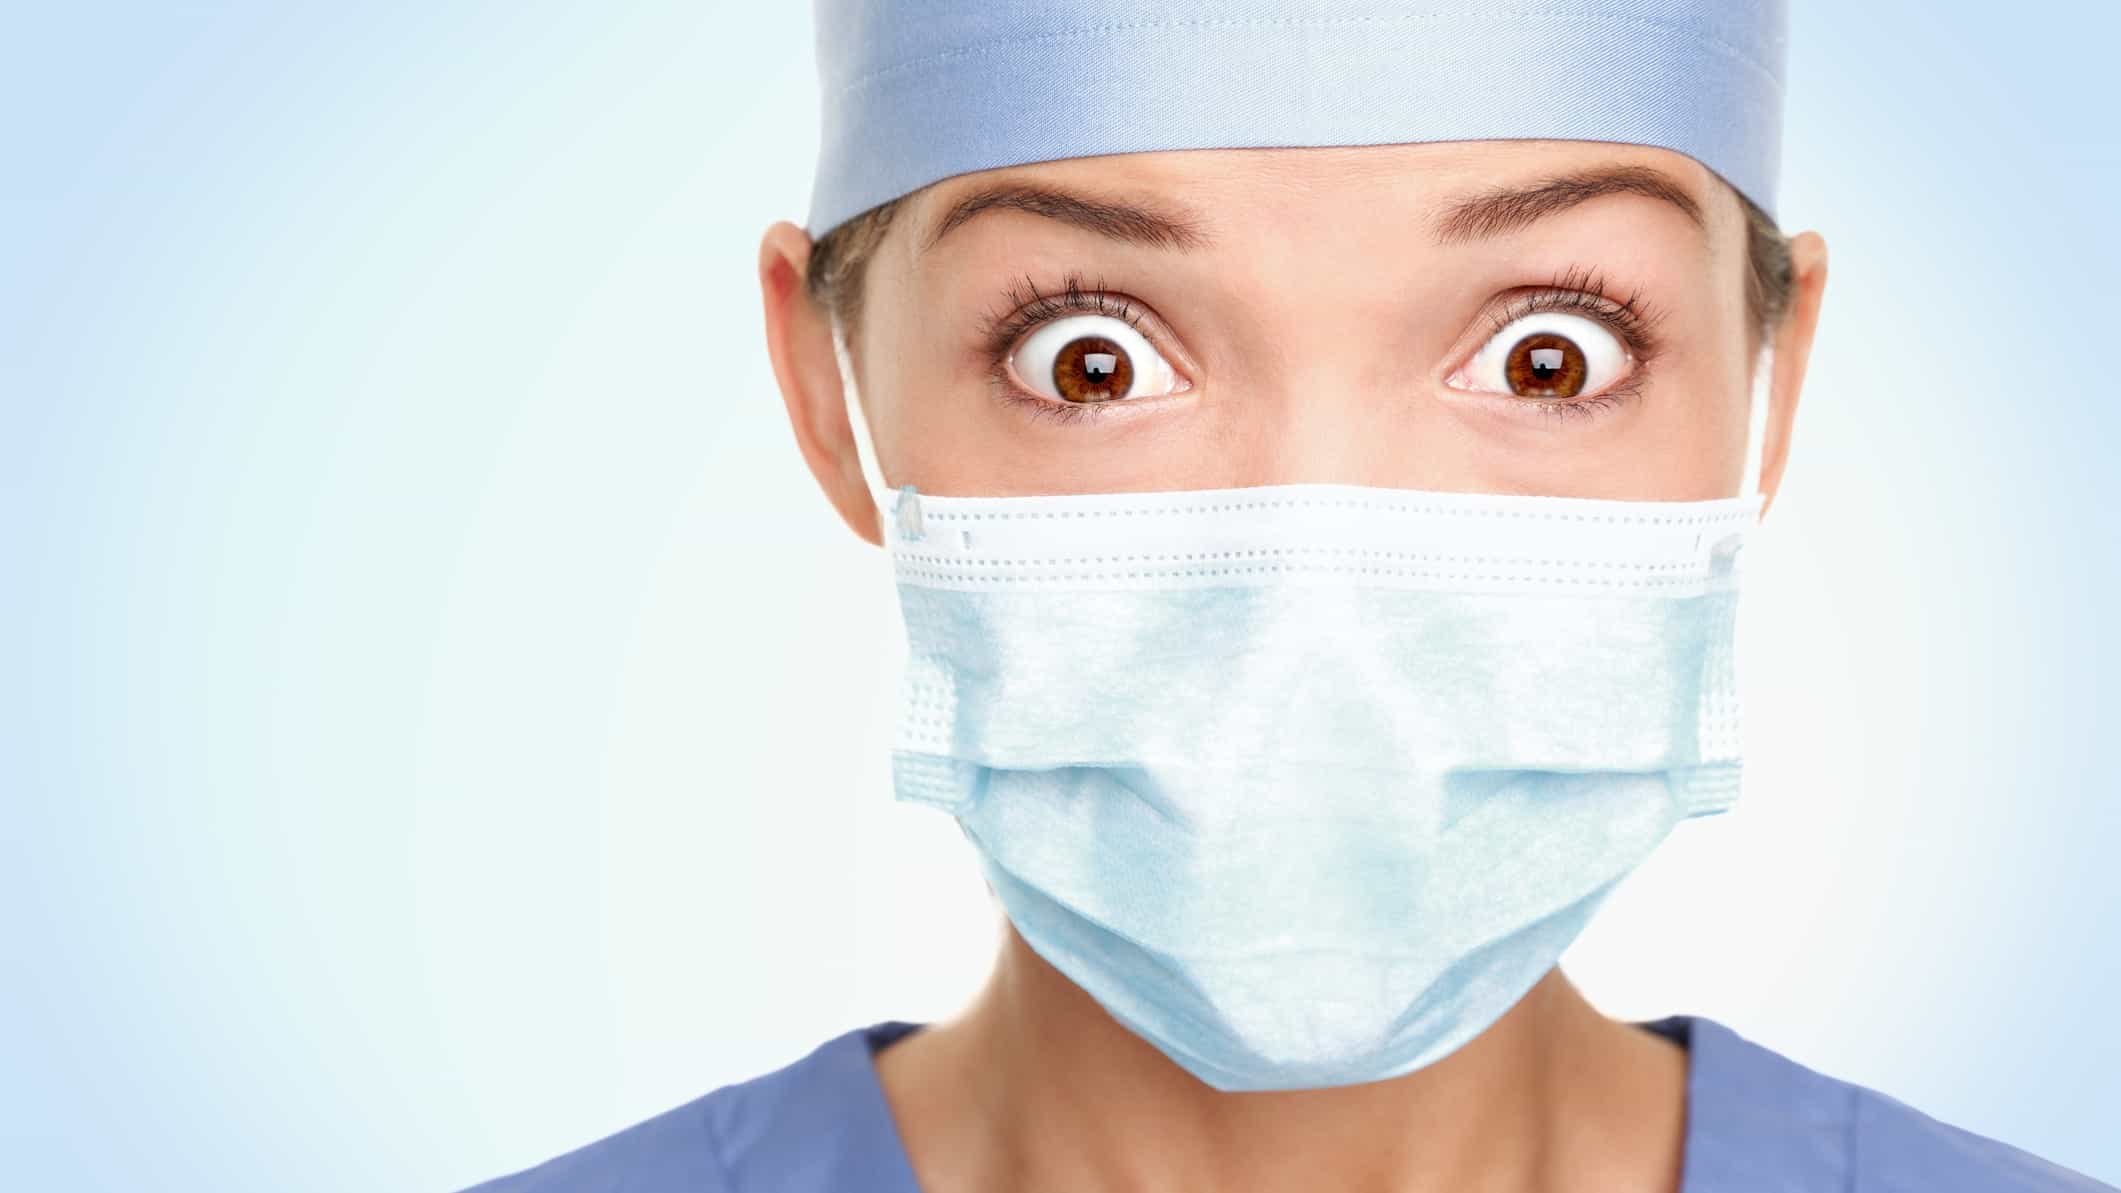 A female health professional has a wide-eyed shocked expression on her face, even behind the face mask.